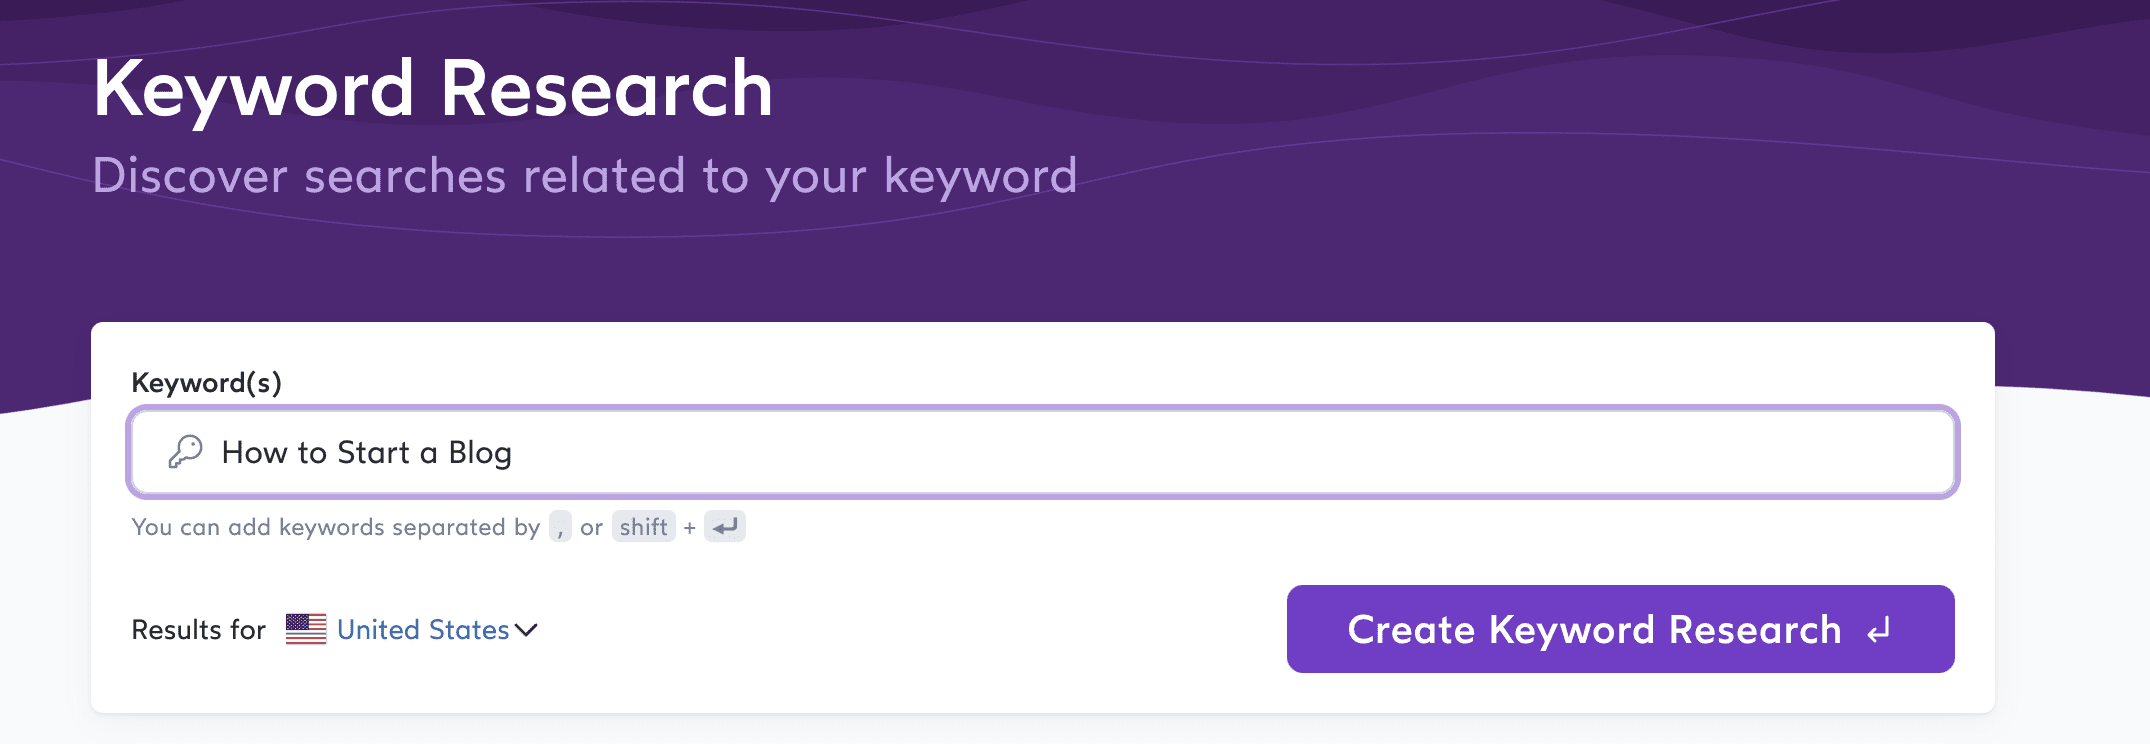 Surfer SEO has a simple keyword research tool